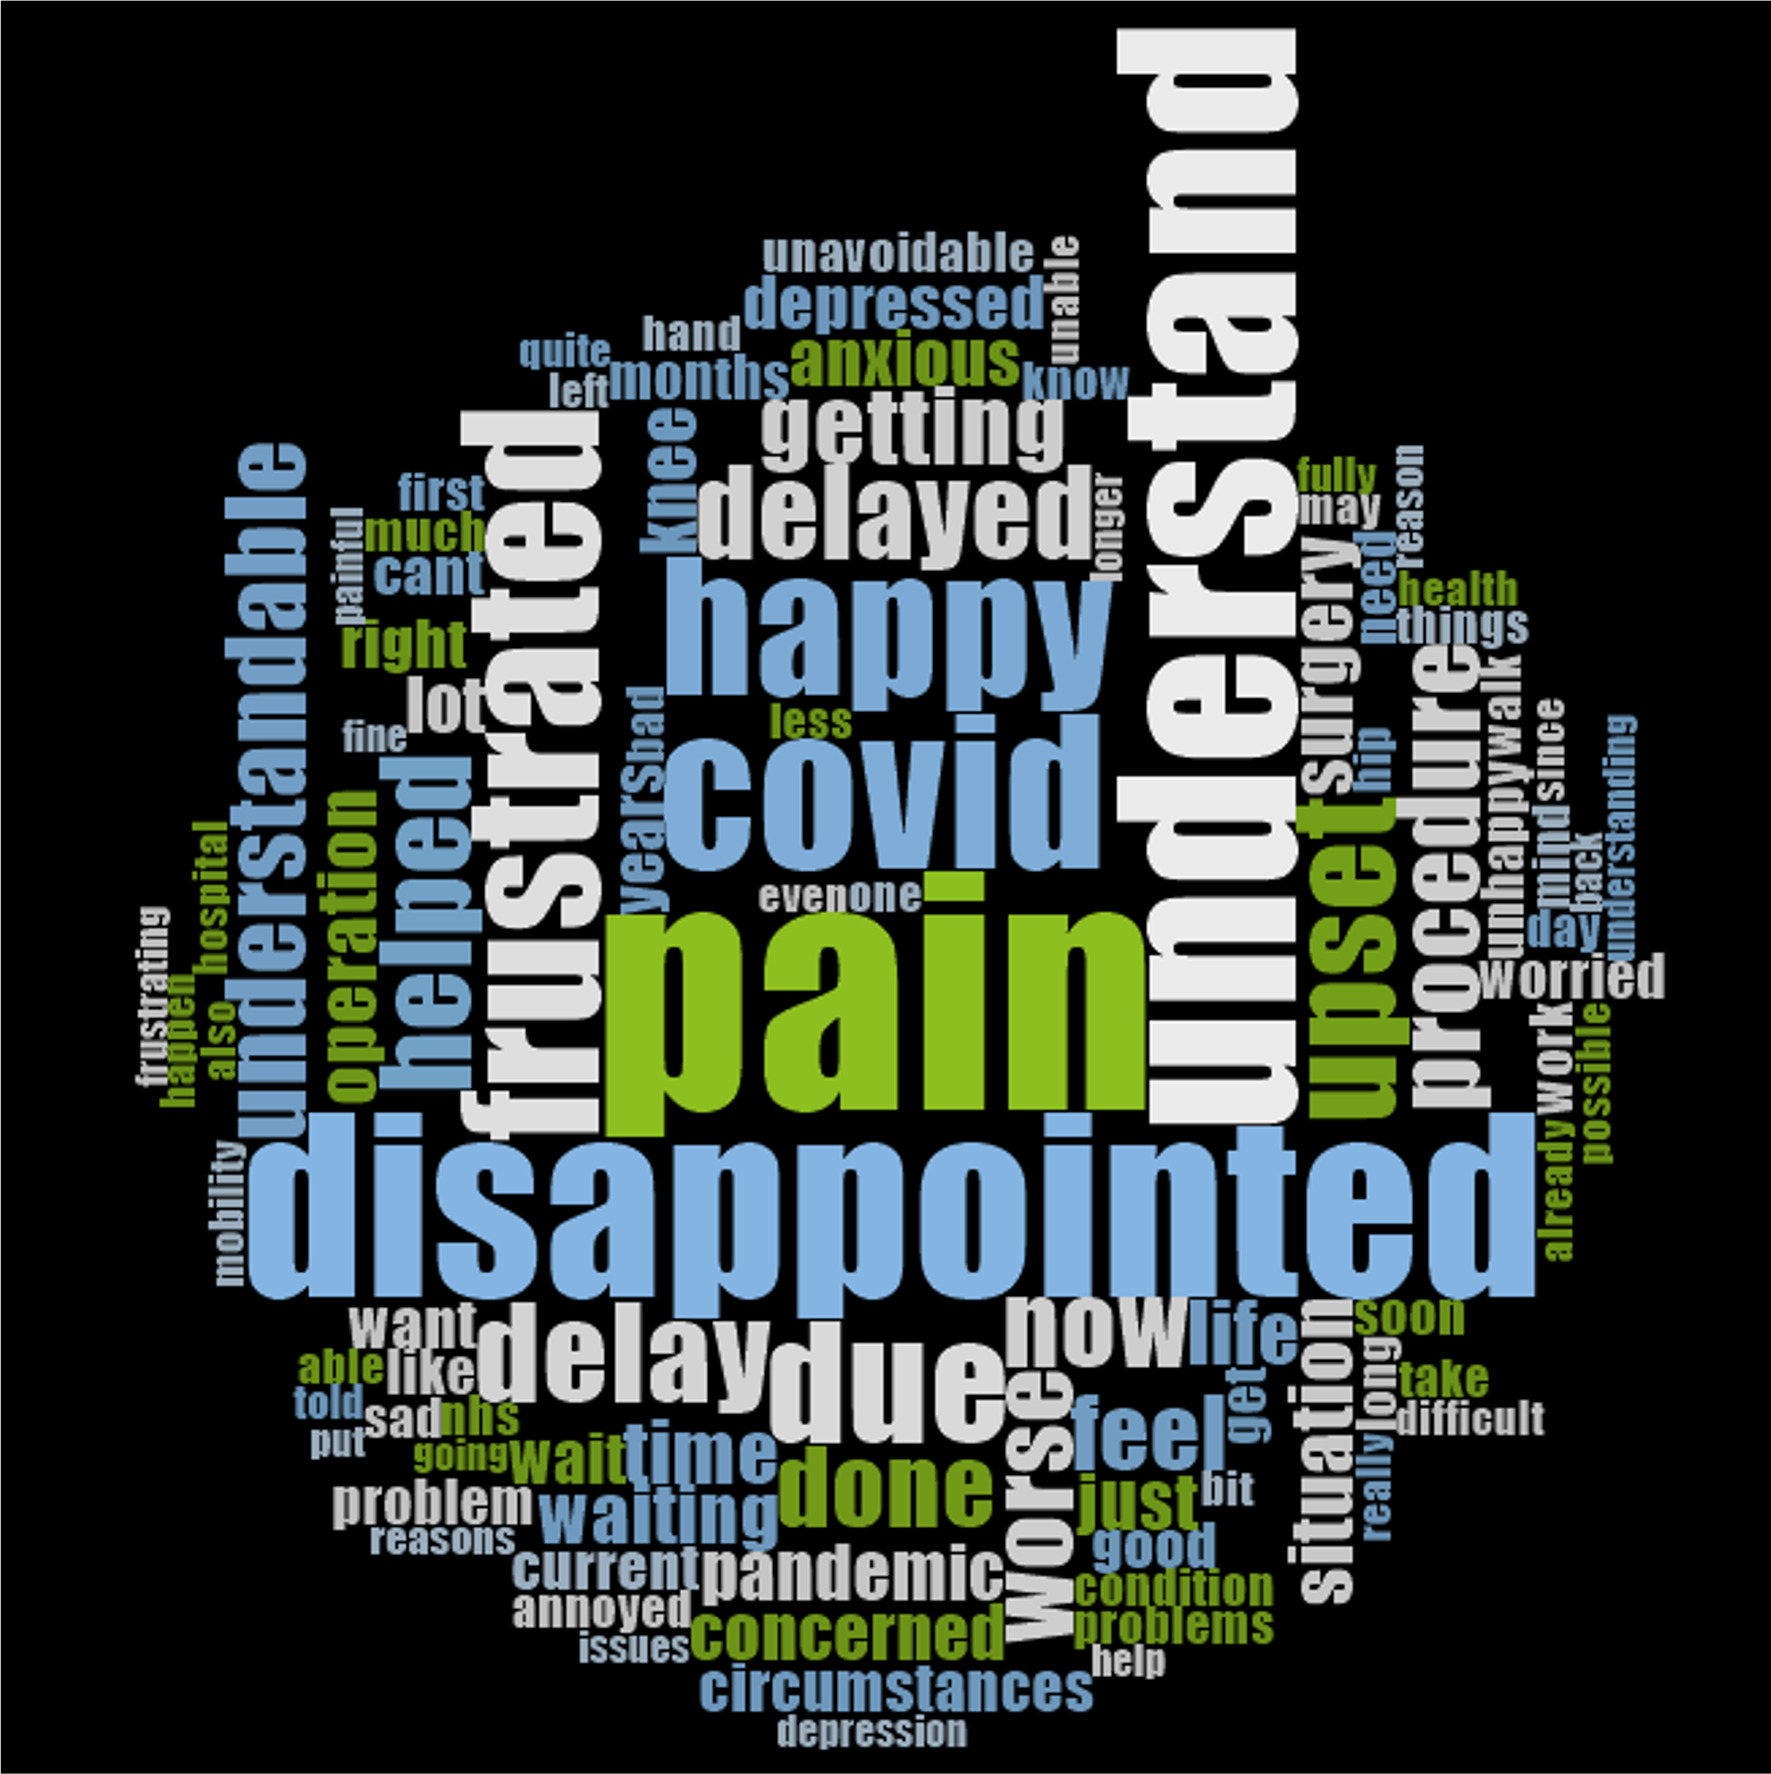 Fig. 2 
            Word cloud based on sentiments expressed in response to the question, “what are your feelings about procedure delays?”
          